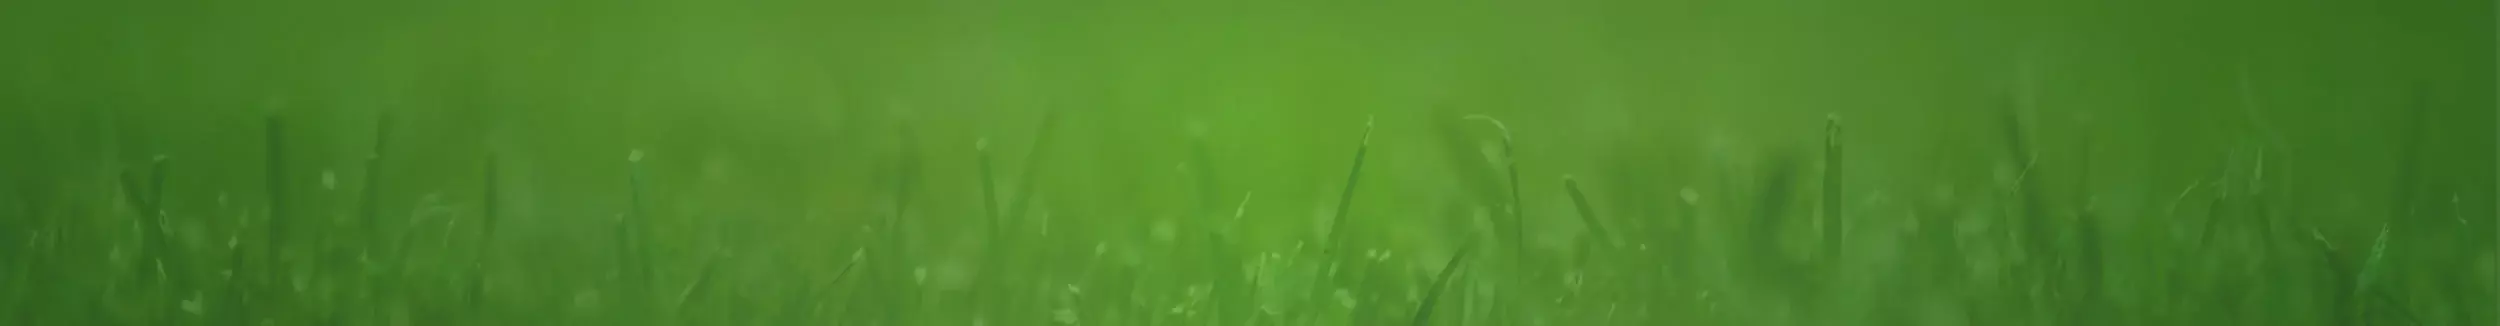 Grass on green background.